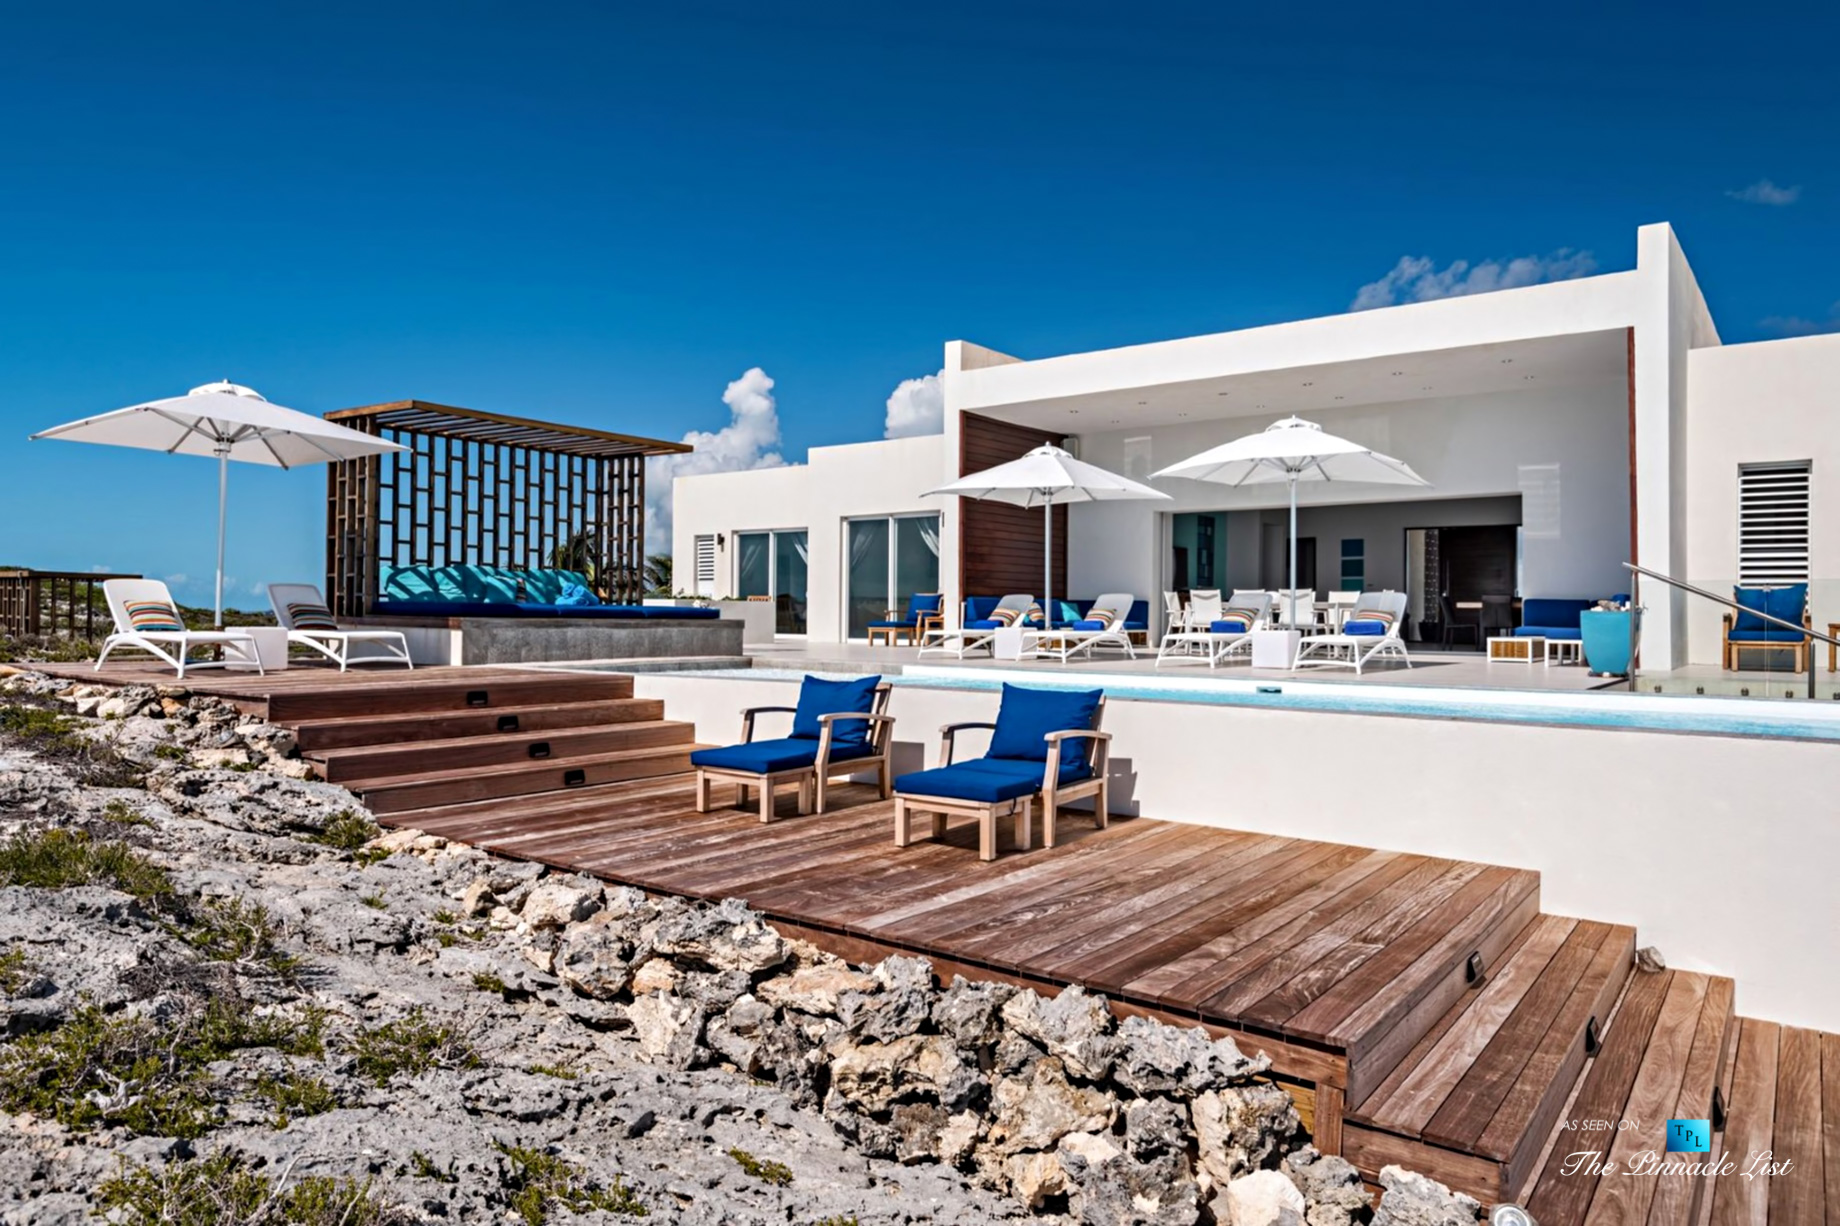 Tip of the Tail Villa – Providenciales, Turks and Caicos Islands – Caribbean Oceanfront House Deck – Luxury Real Estate – South Shore Peninsula Home